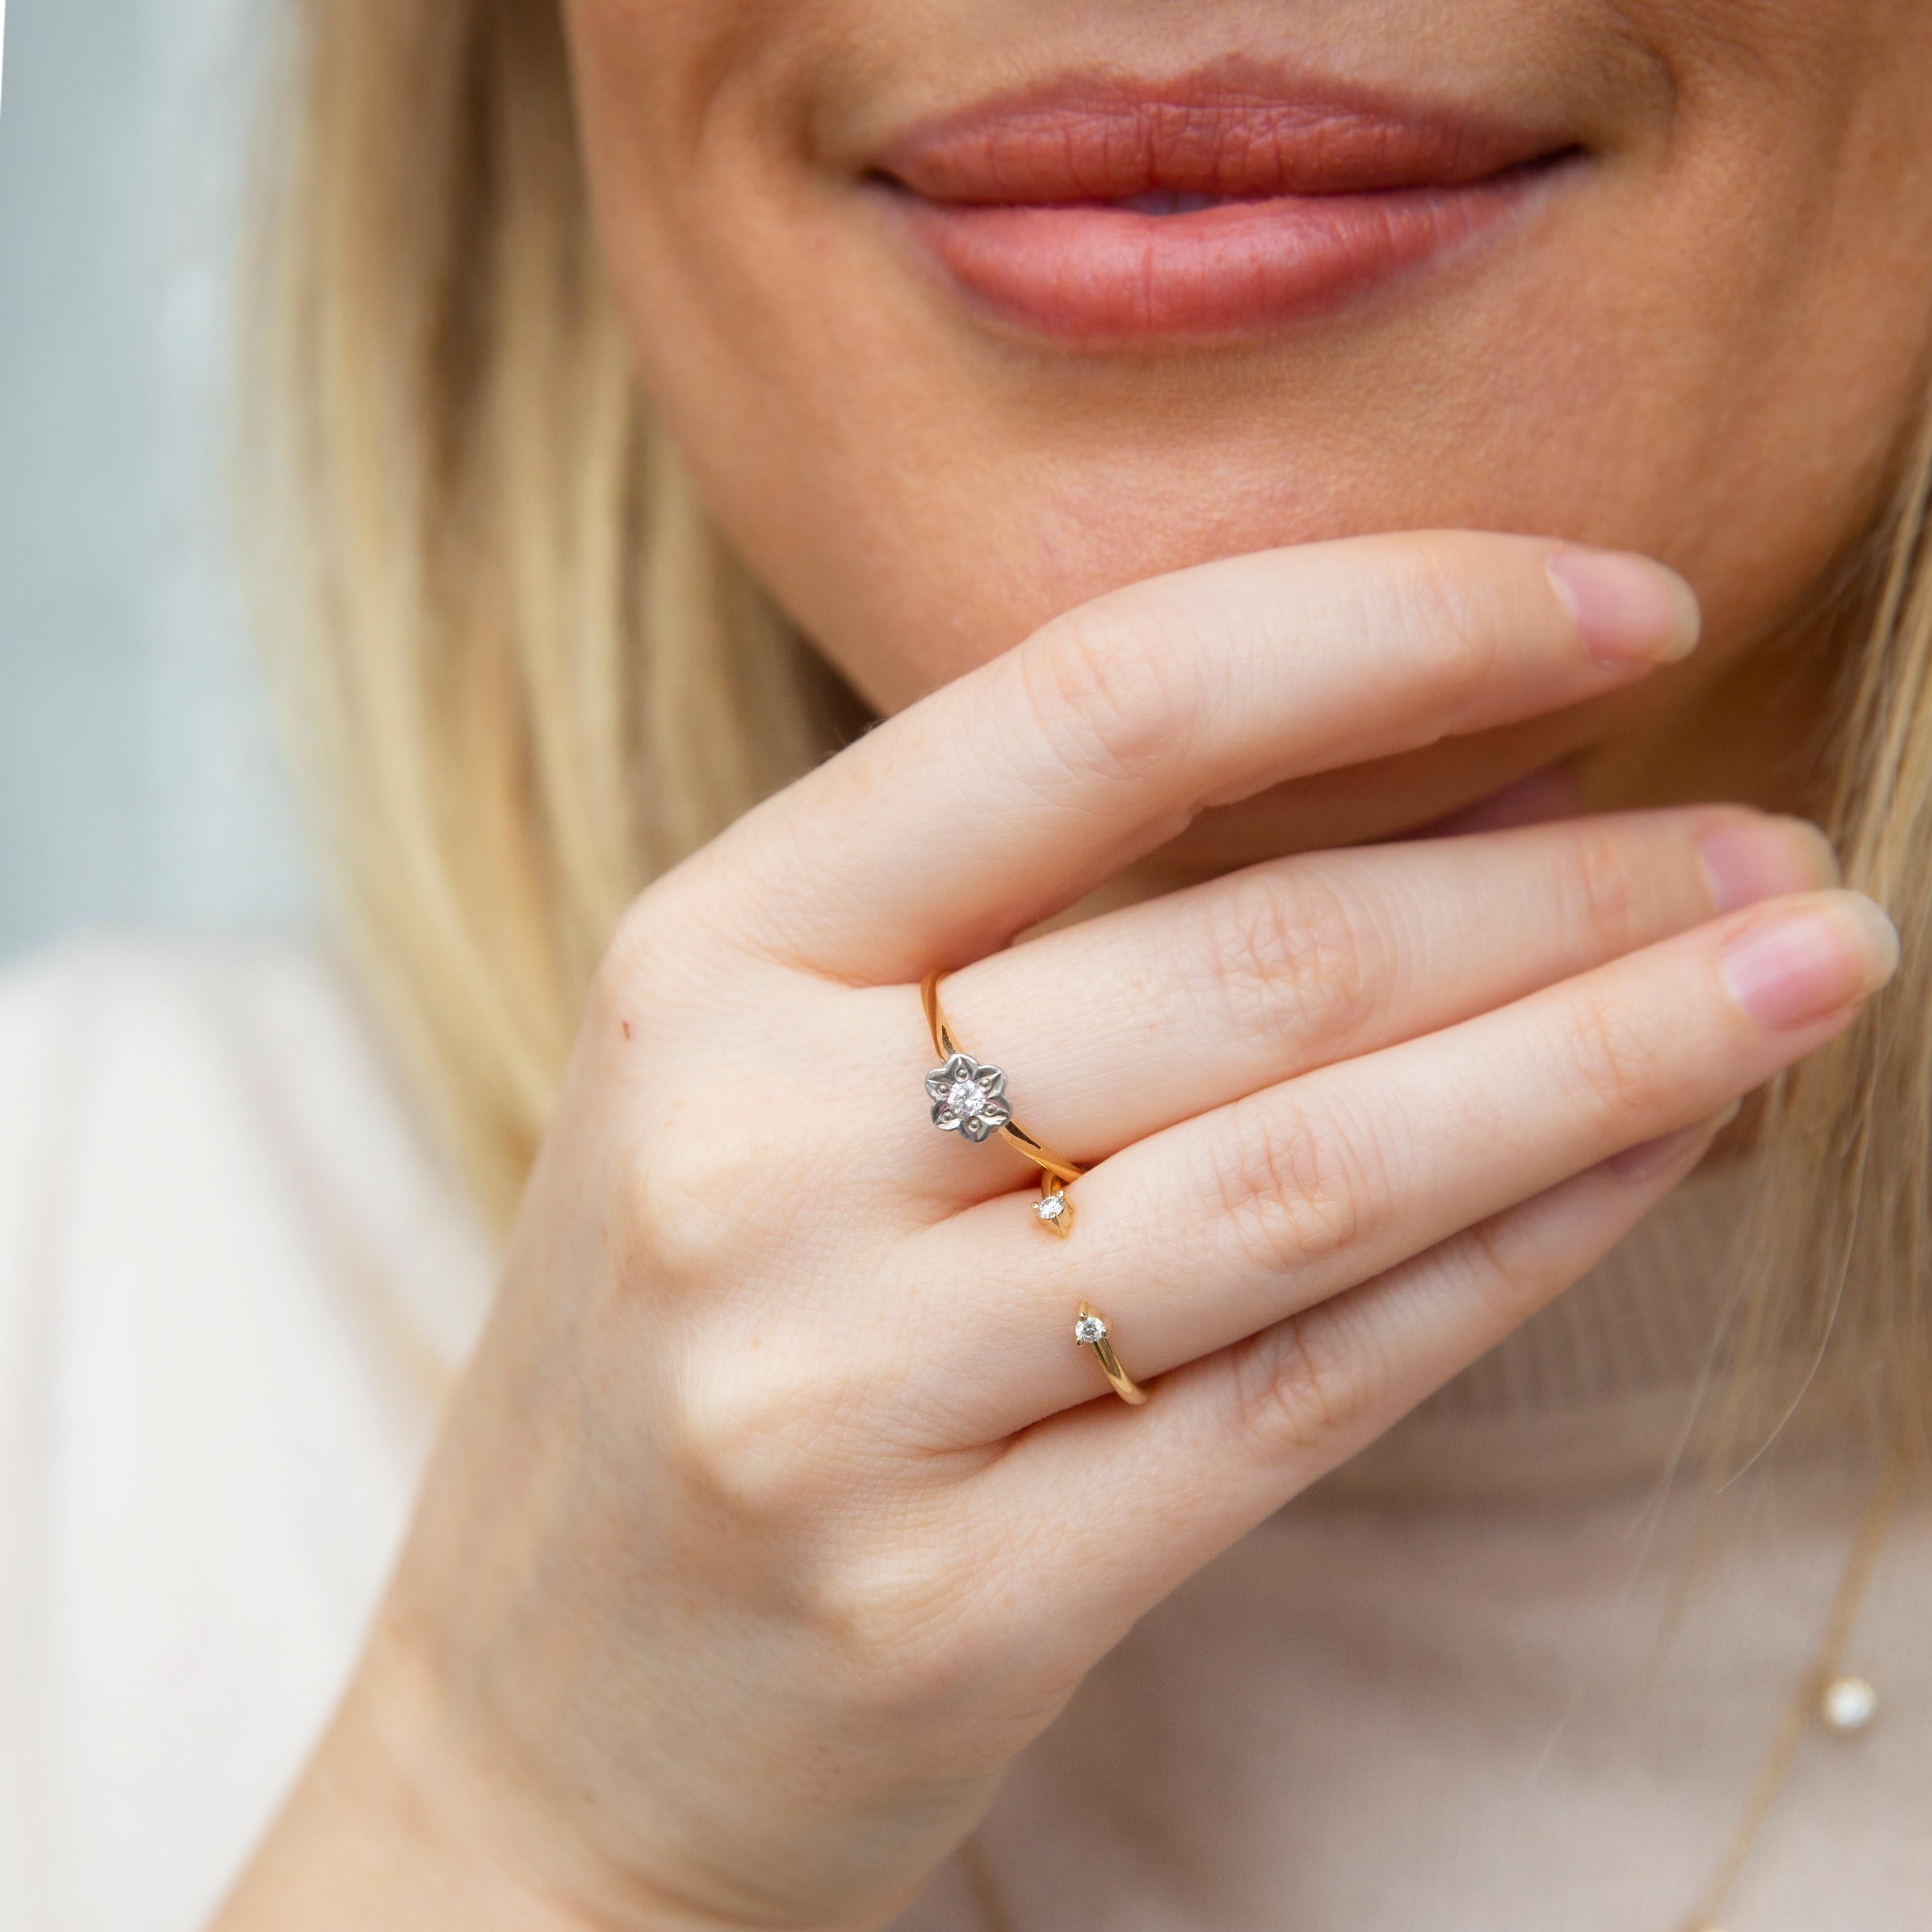 The Claire Ring, crafted in 18 carat gold is a vintage delight. Her sweet flower embellished with a single diamond is a celebration of nature's whimsy. A most precious inclusion in your collection.

The Claire Ring Gem Details
The round brilliant